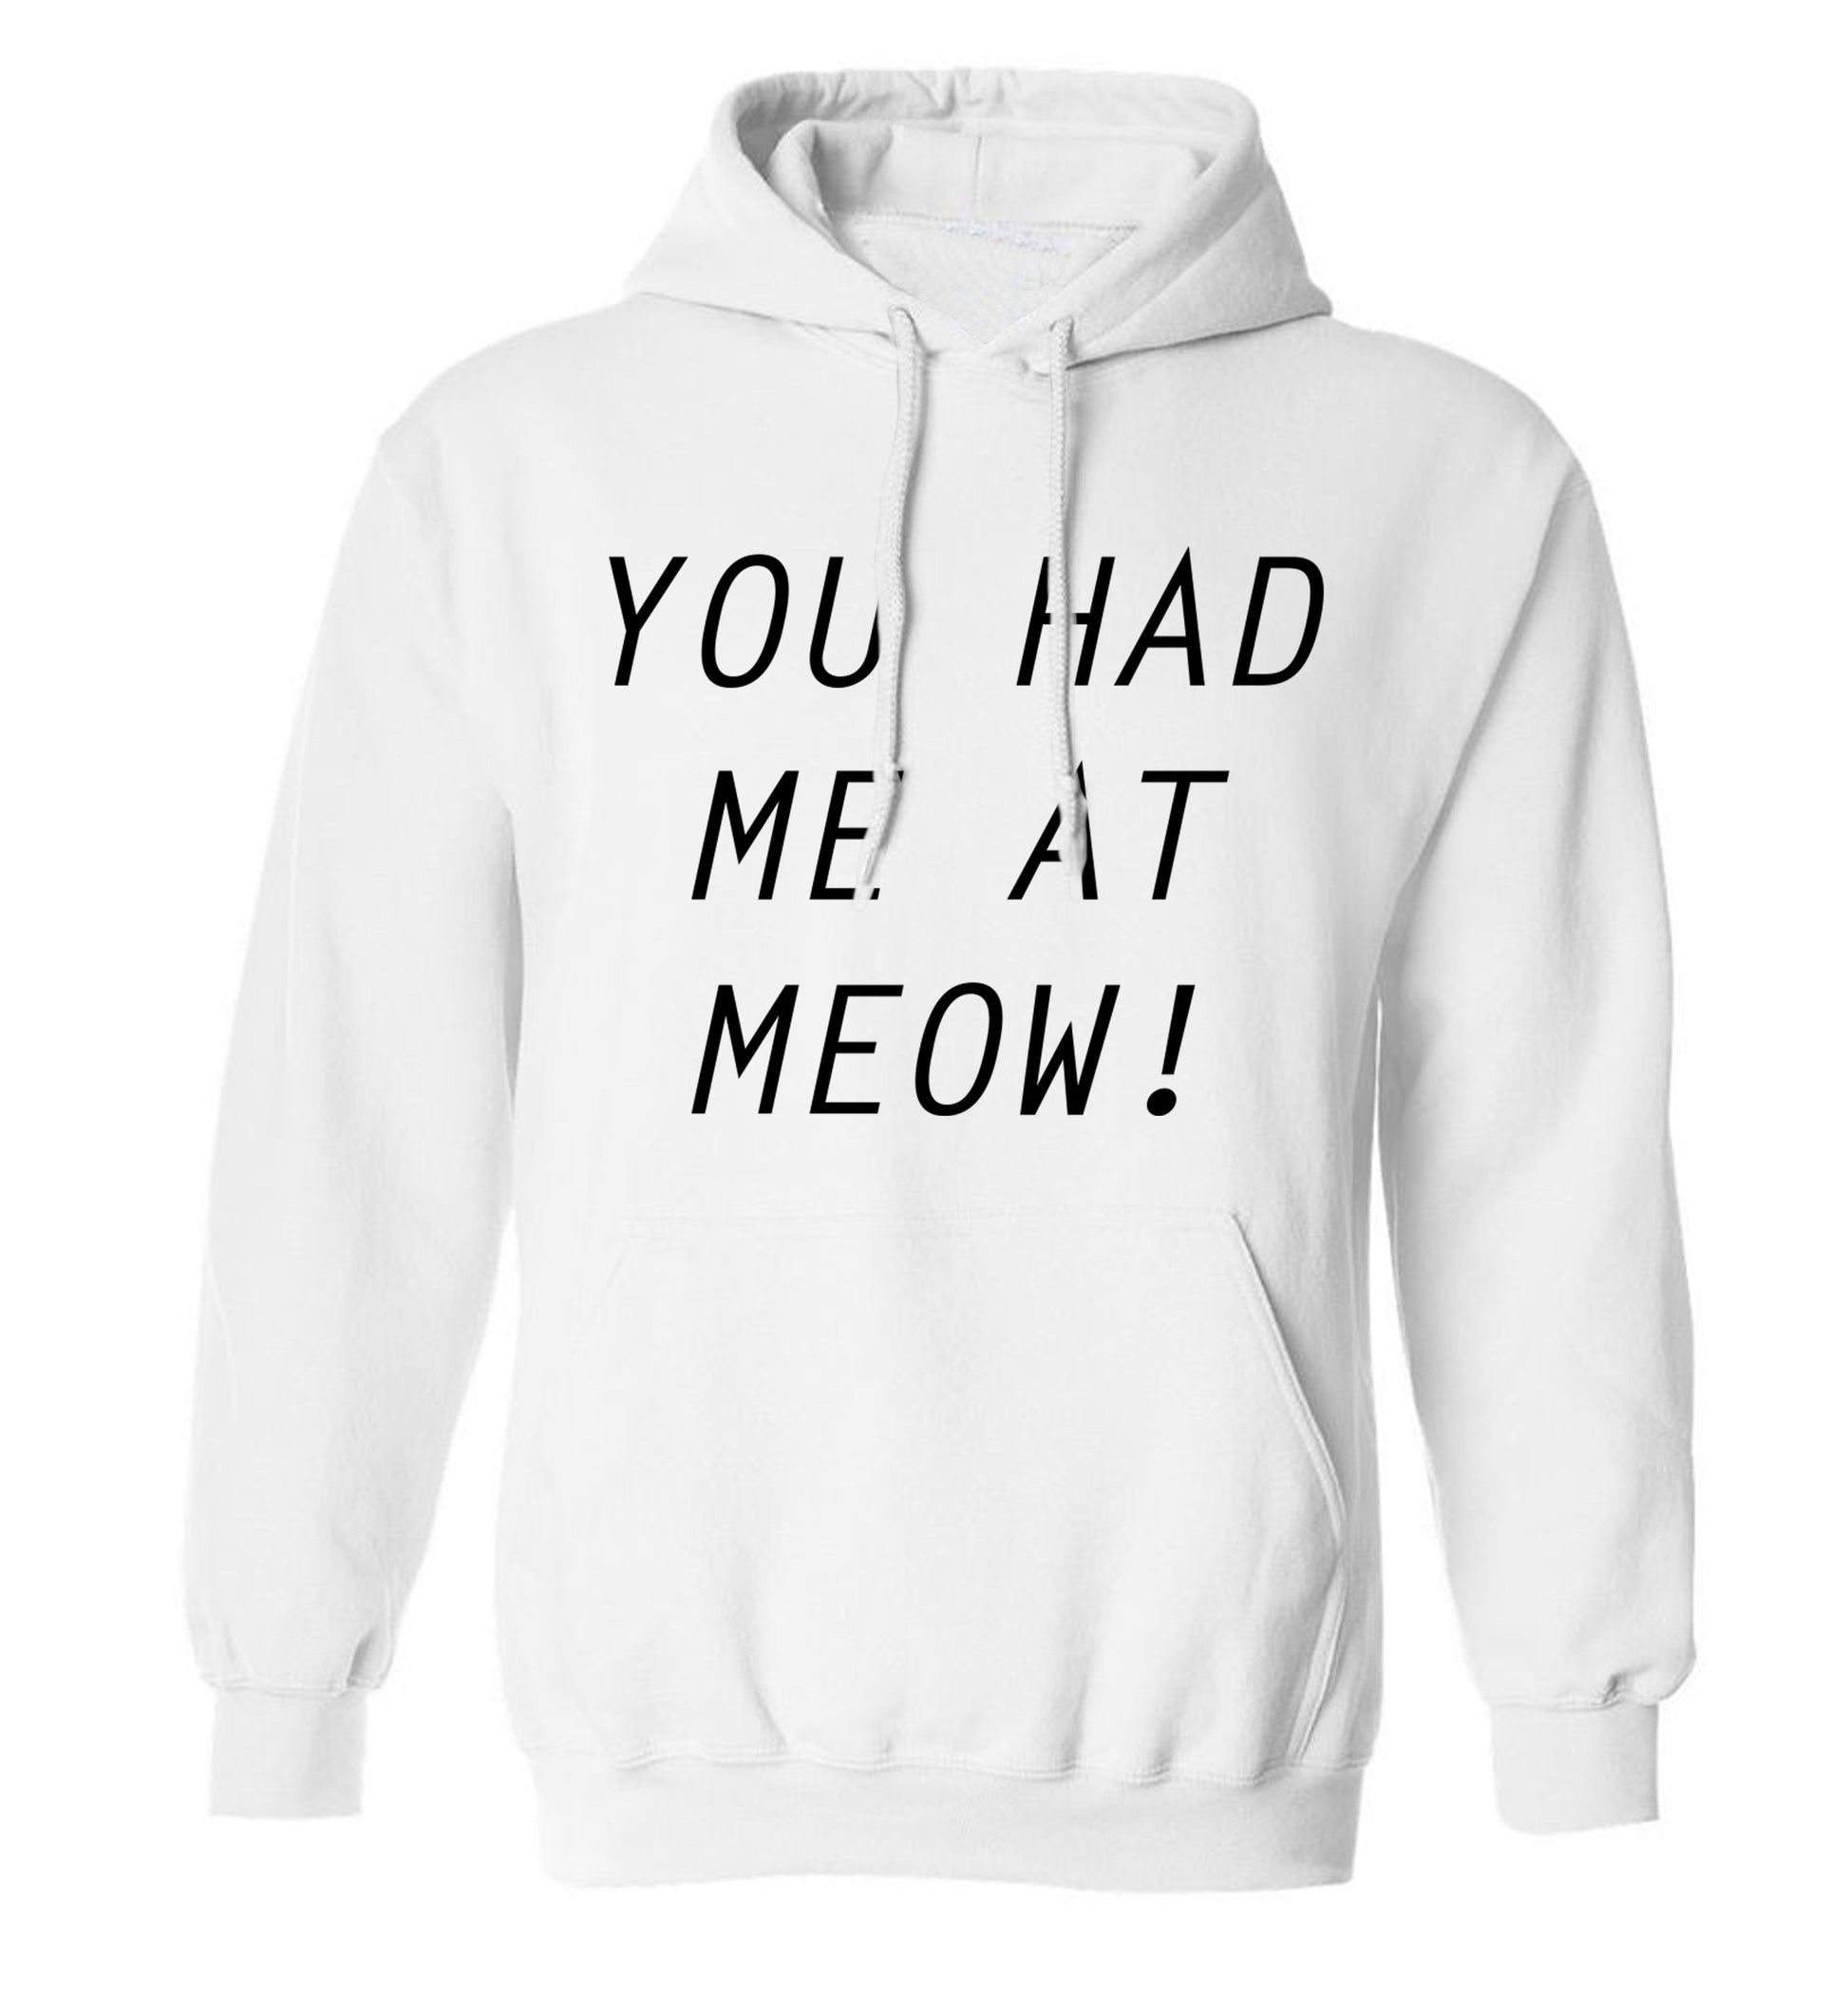 You had me at meow adults unisex white hoodie 2XL